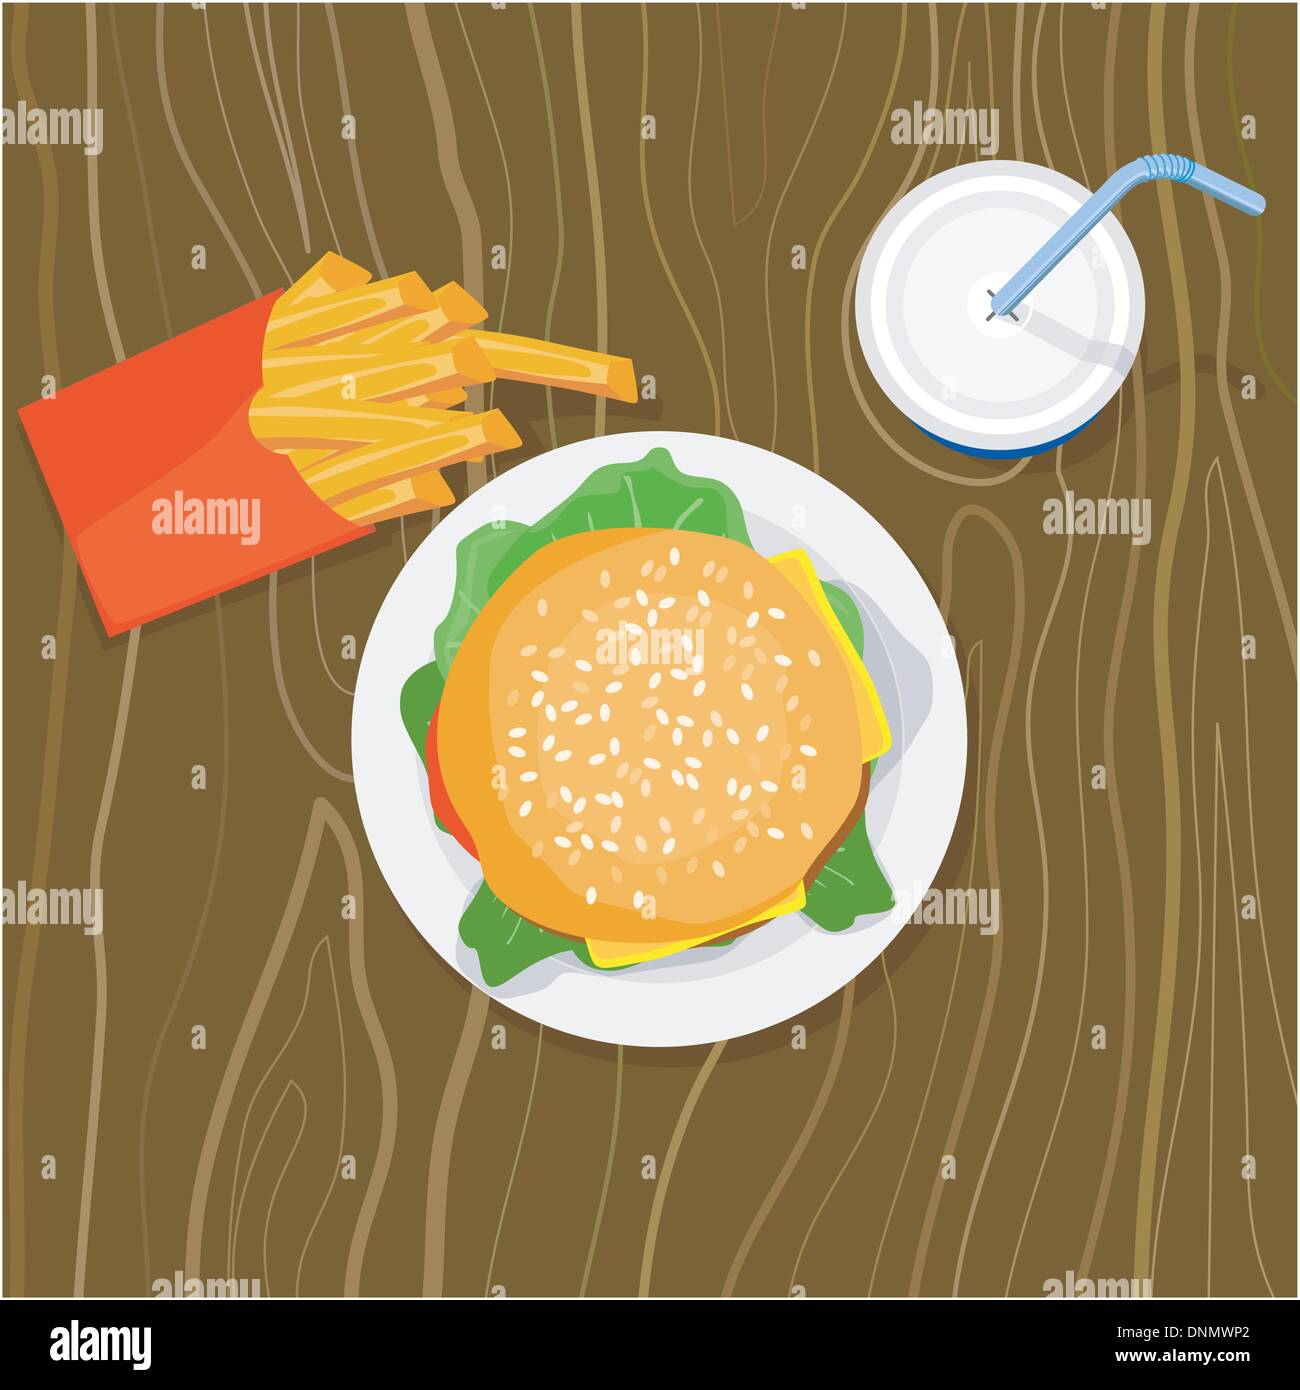 Illustration of burger, fries, and a drink in birds-eye view done in retro style. Stock Vector